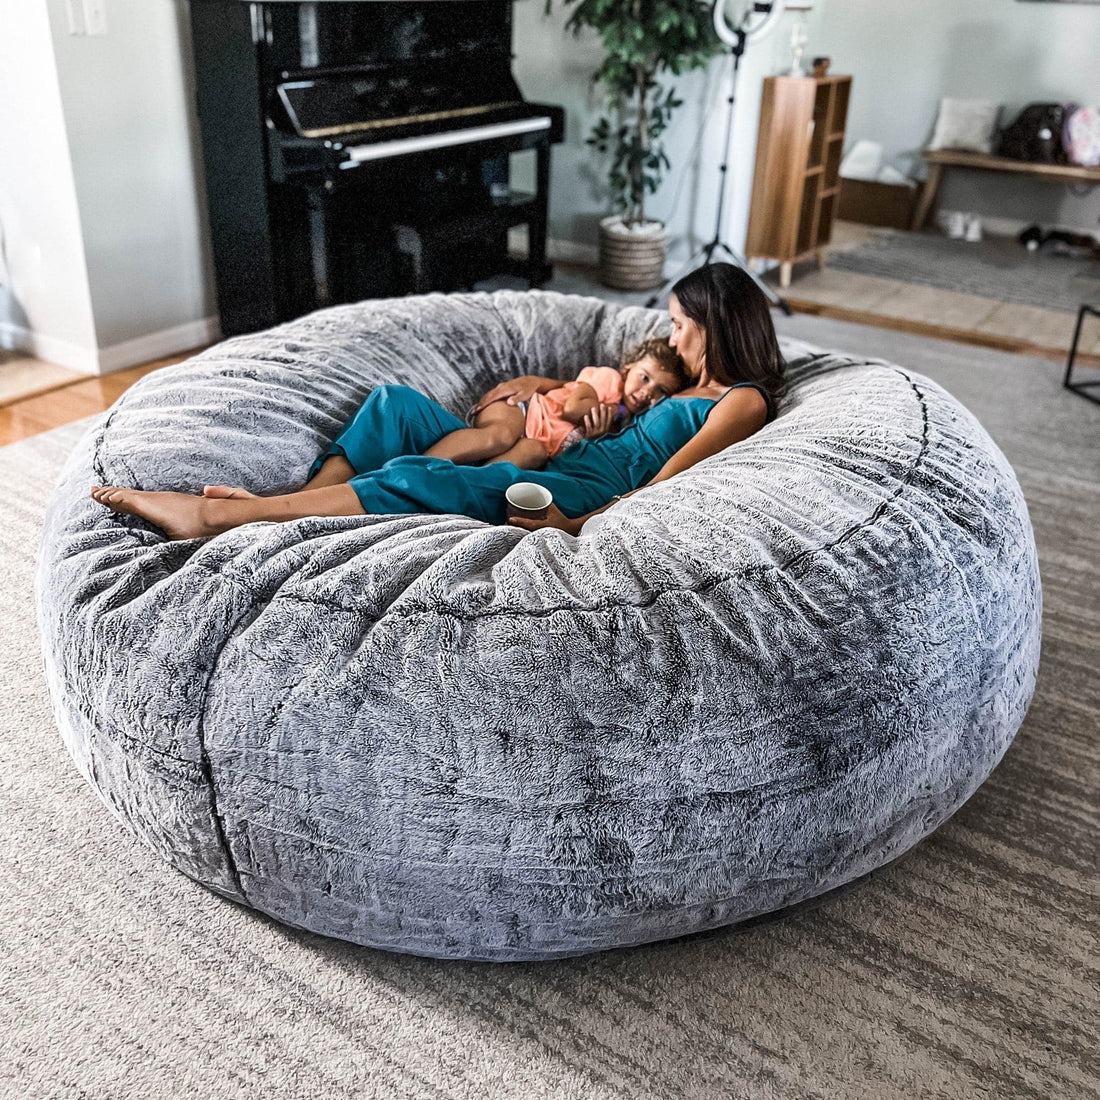 The Lovesac Giant Pillow